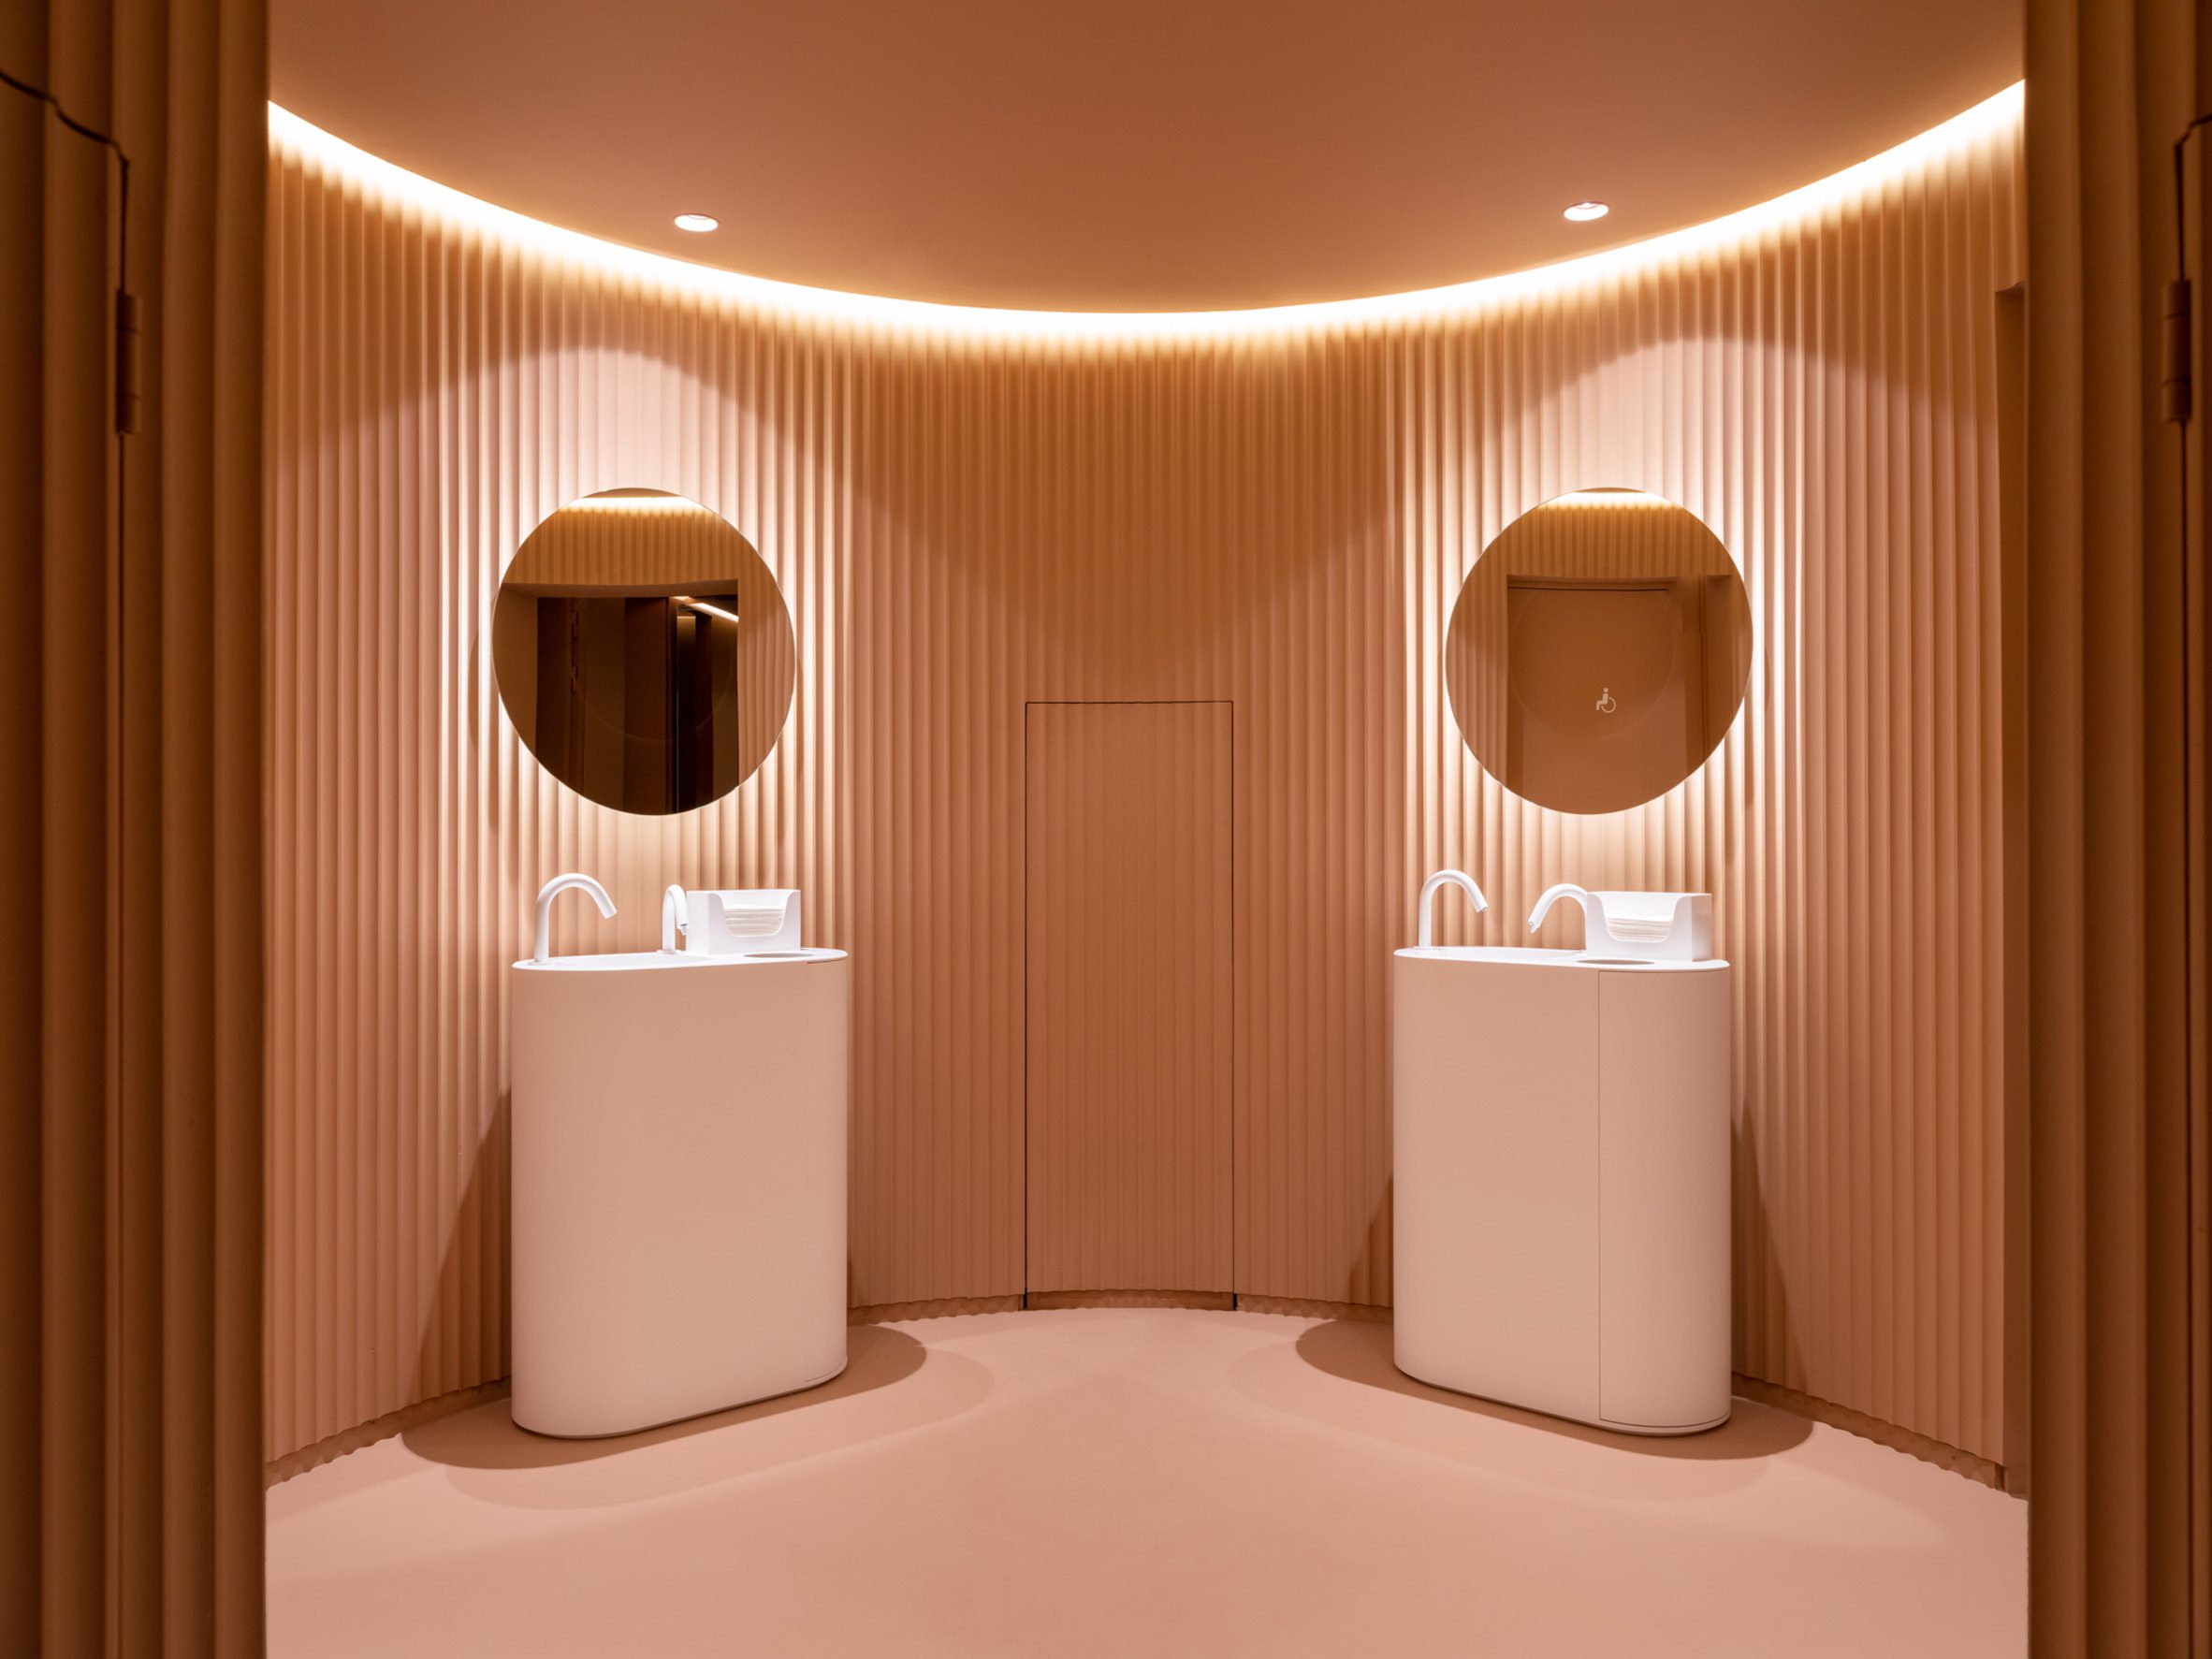 Peach public bathroom interior with two freestanding sinks and circular mirrors